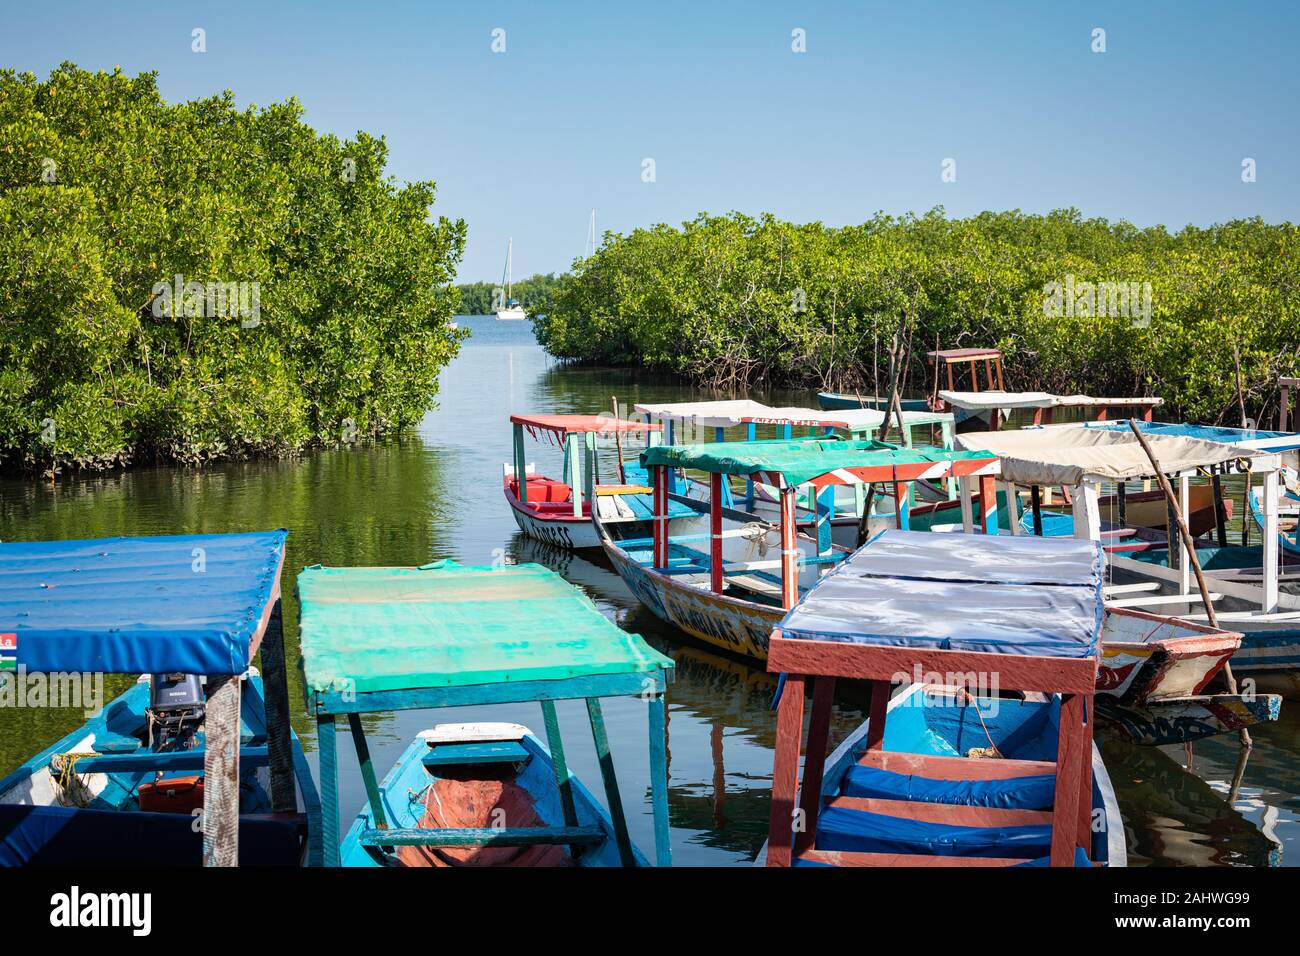 Gambia Mangroven. Lamin Lodge. Traditionelle lange Boote. Green mangrove Bäume im Wald. Gambia. Stockfoto